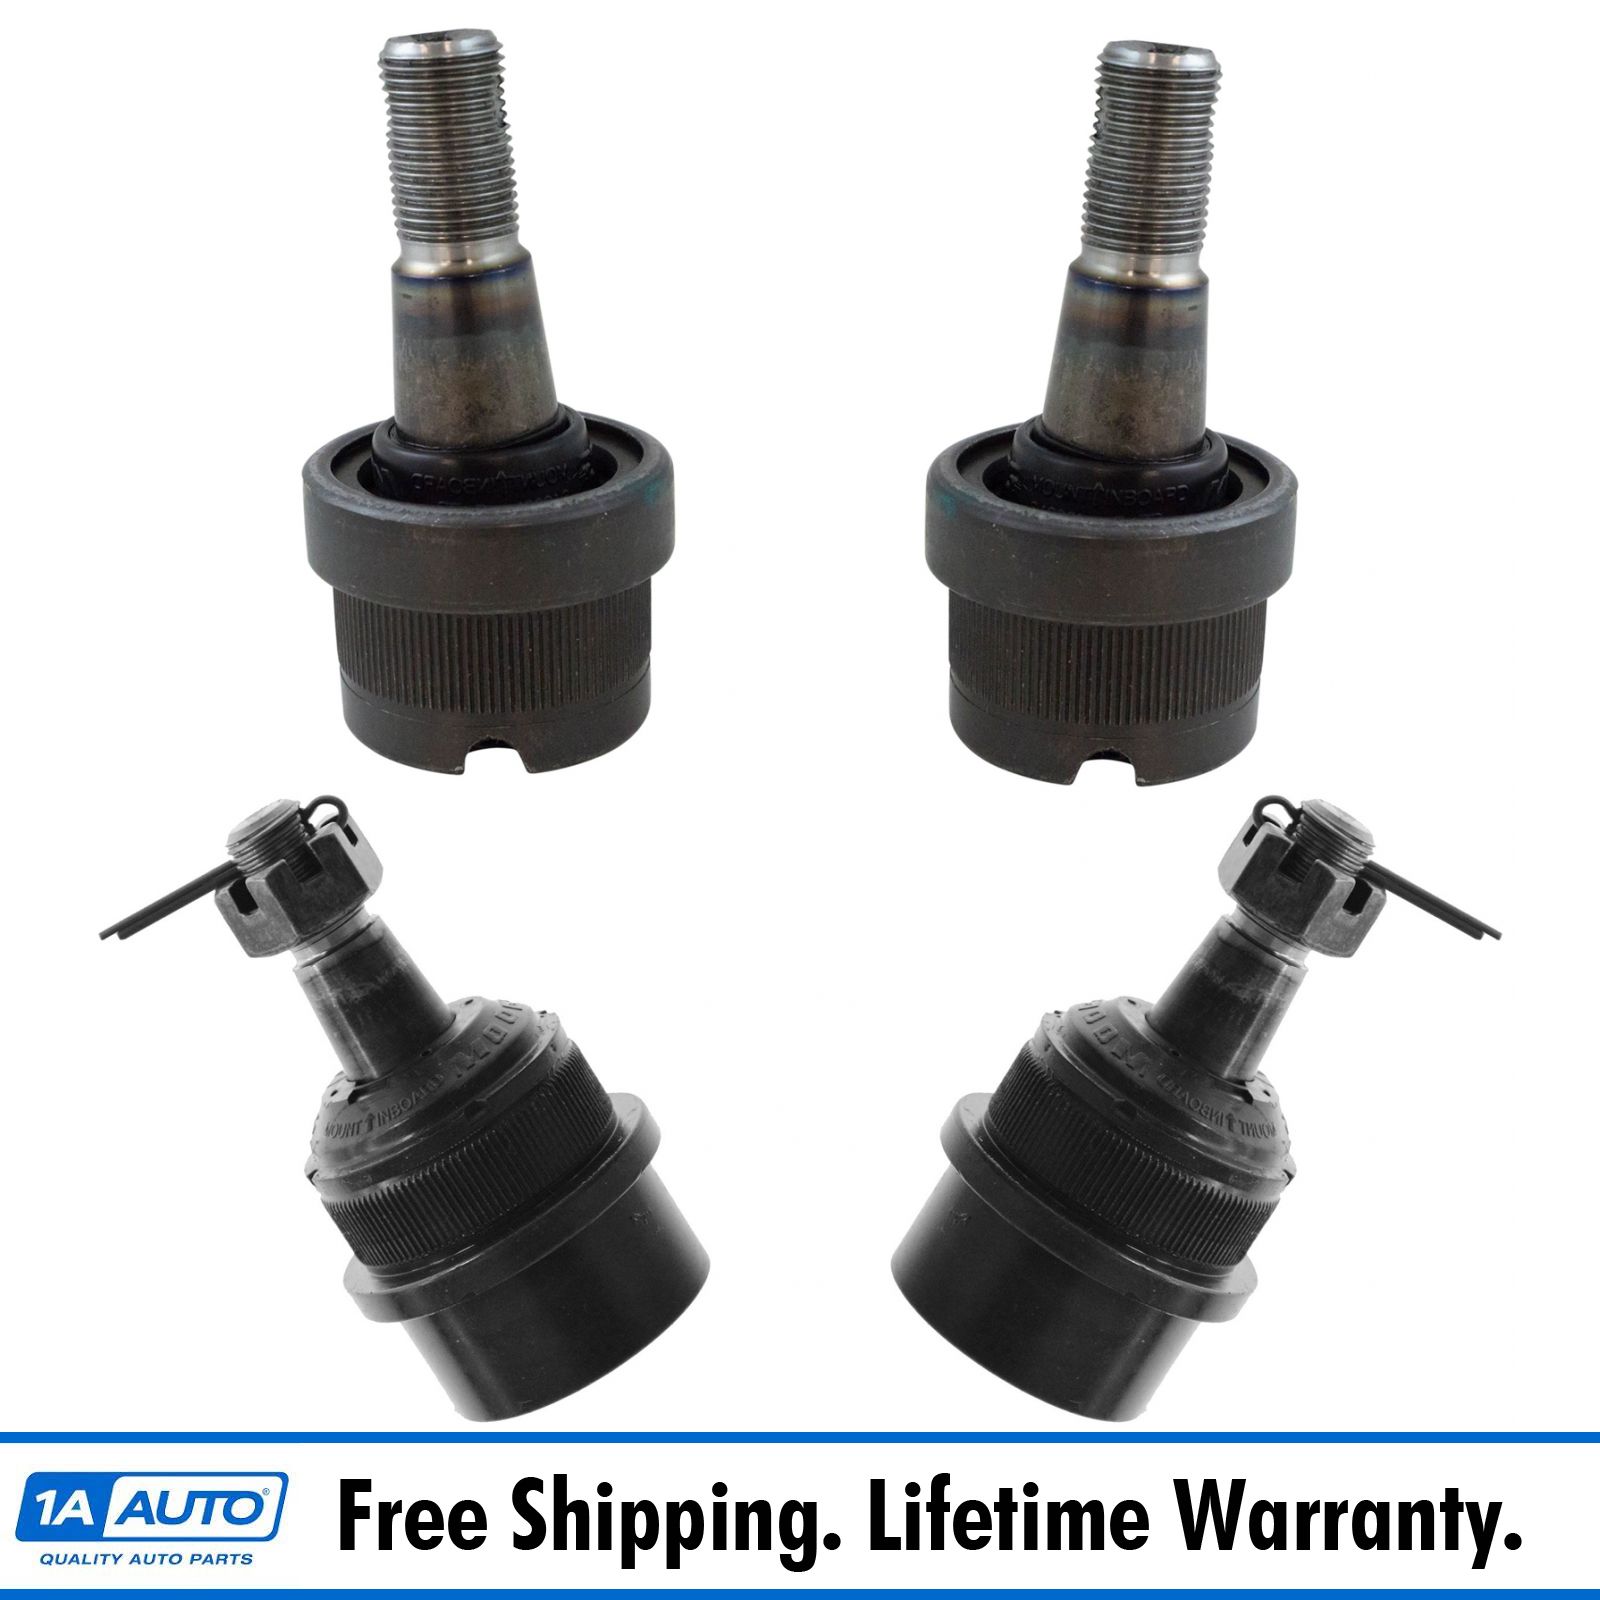 PartsW 4 Piece Kit Upper /& Lower Ball Joints 2WD Only